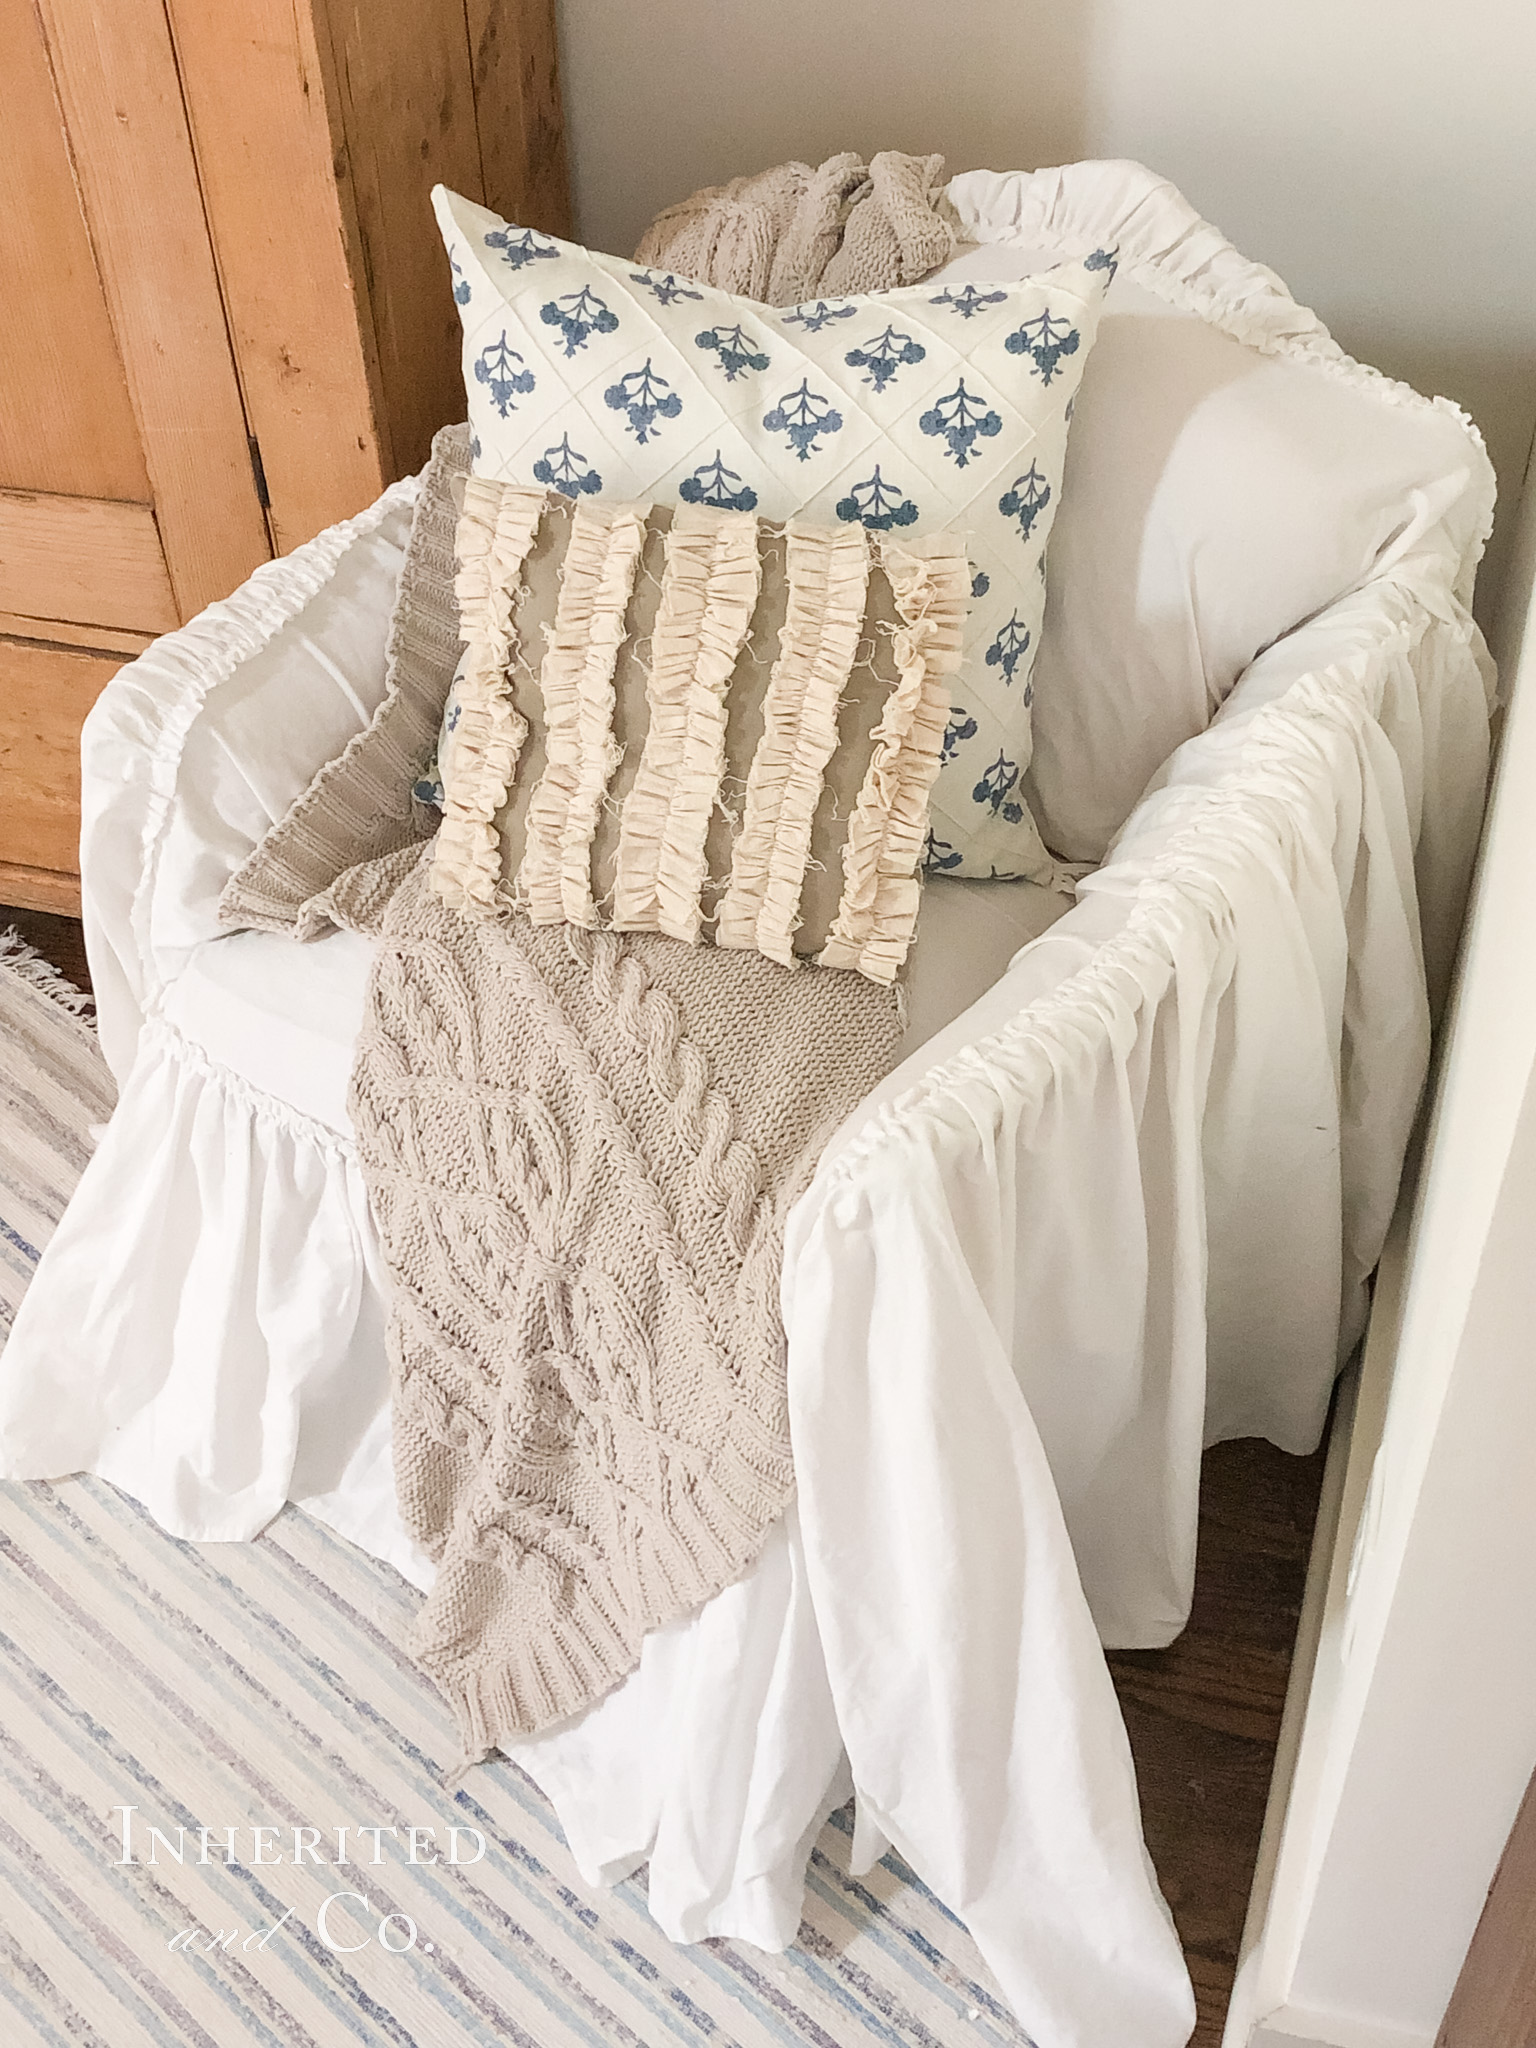 Ruffled white slipcover on a vintage chair